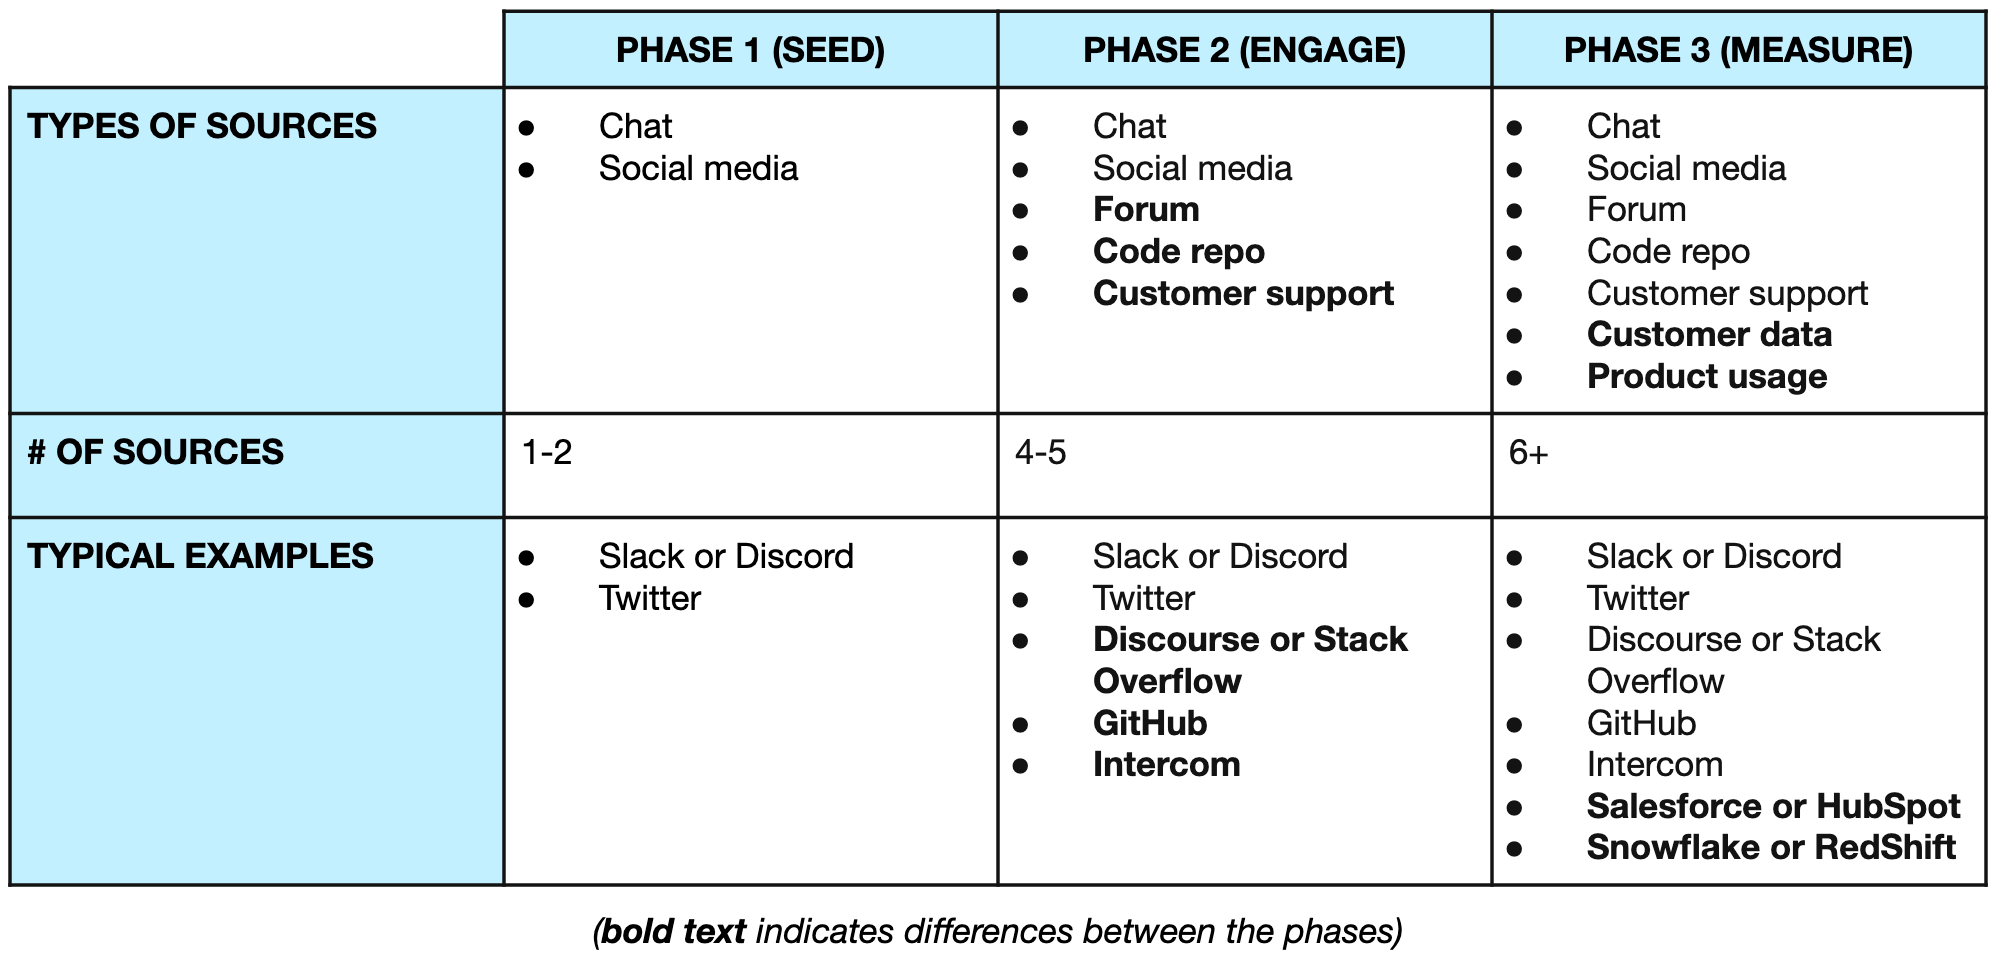 Table summarizing the community and business data sources typically connected for each phase of the community maturity curve